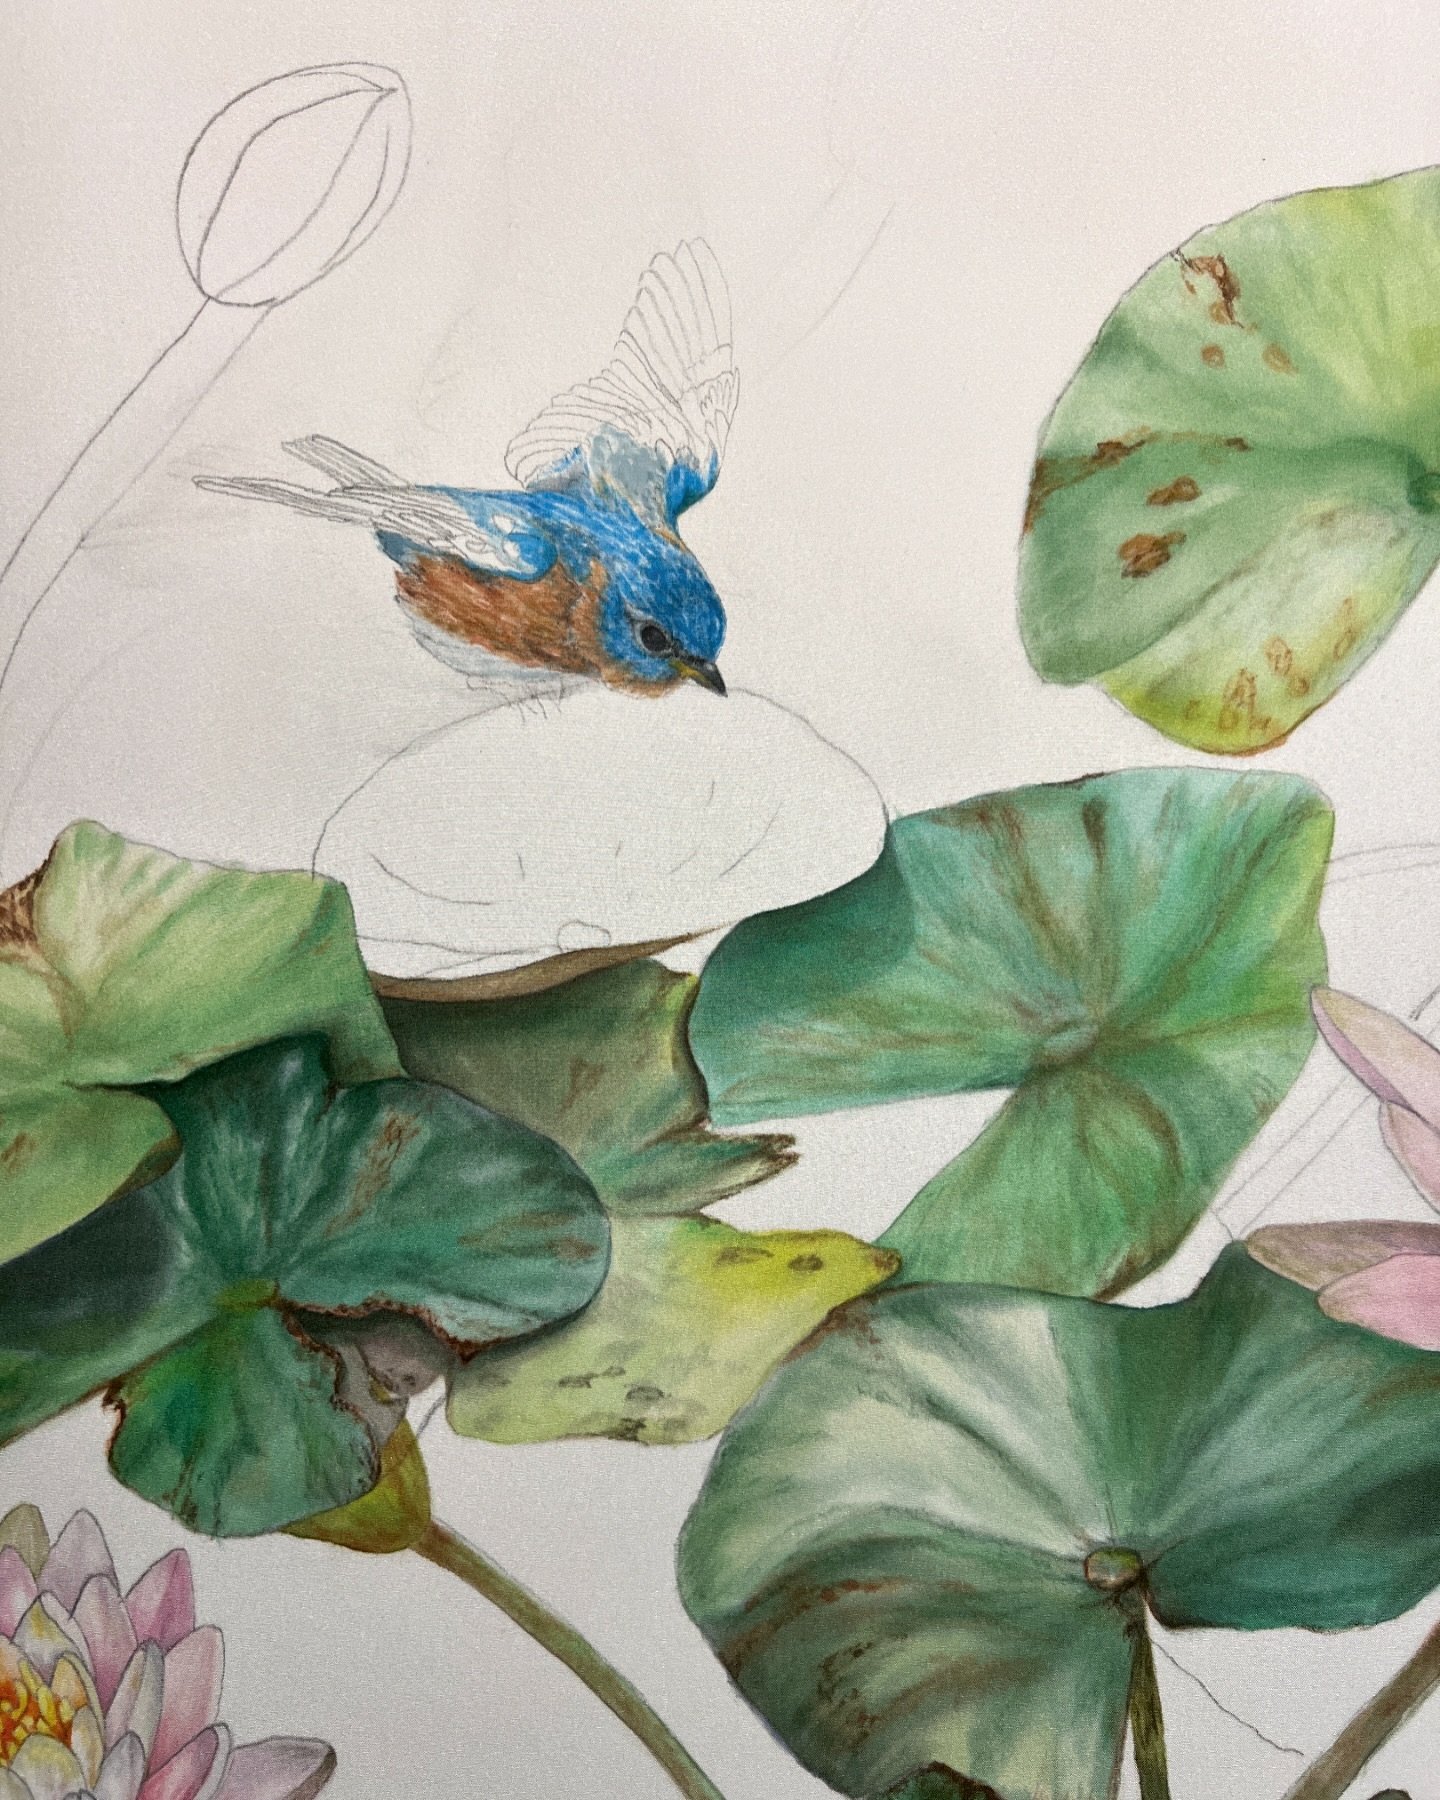 &ldquo;Hope&rdquo; is the thing with feathers 
That perches in the soul 
And sings the tune without the words 
And never stops - at all 
~Emily Dickinson

#silkpainting #wip #austinartist #bluebird #hope #silkart #silkpaintinginprogress #ontheeasel #